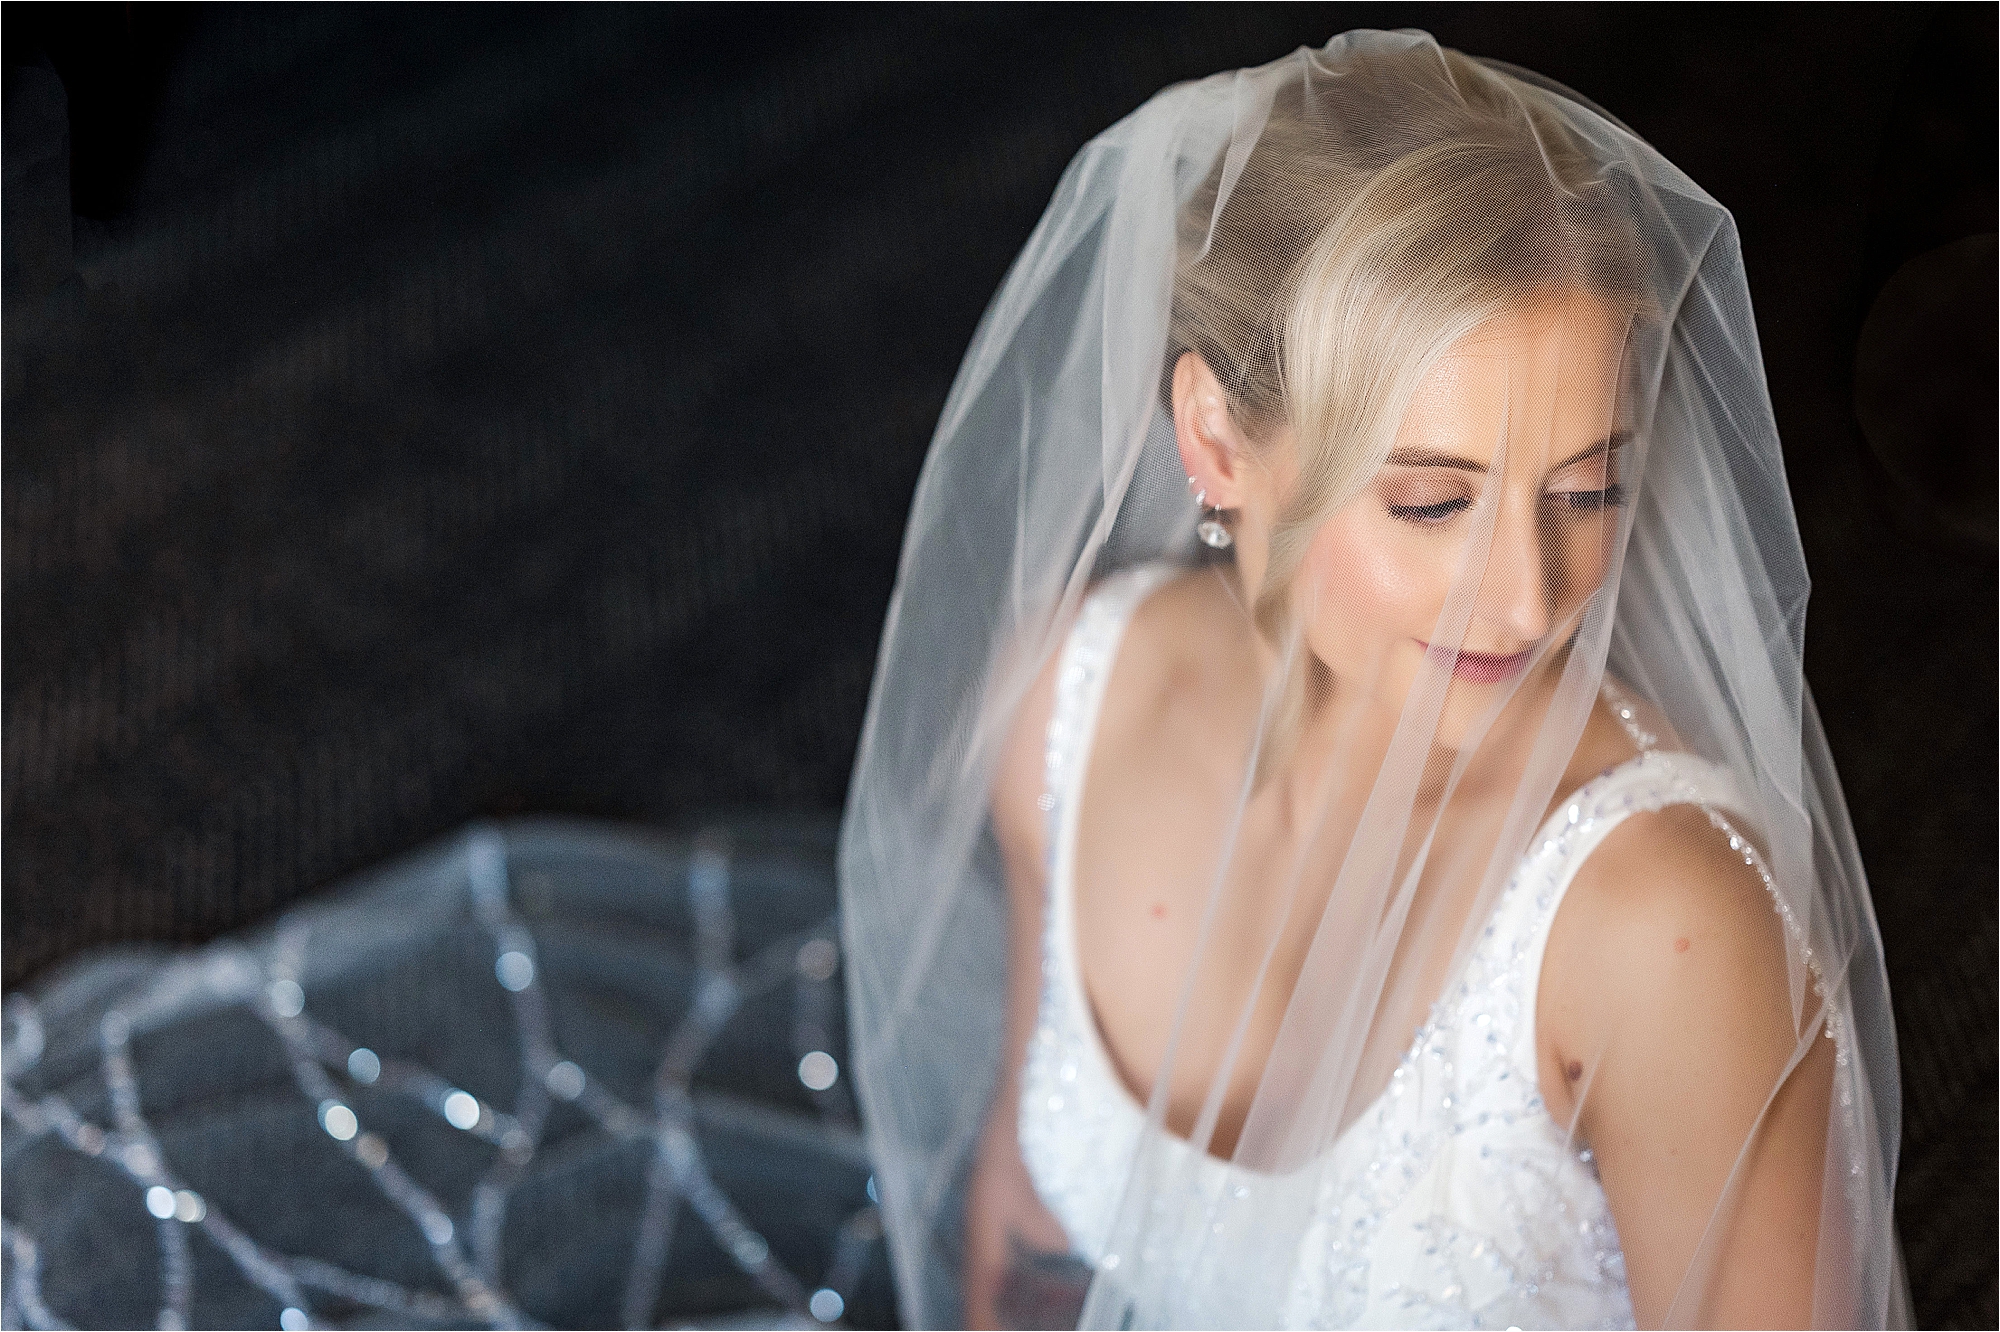 beautiful bride getting ready photo pittsburgh • Soldiers and Sailors Memorial Hall Wedding Photos